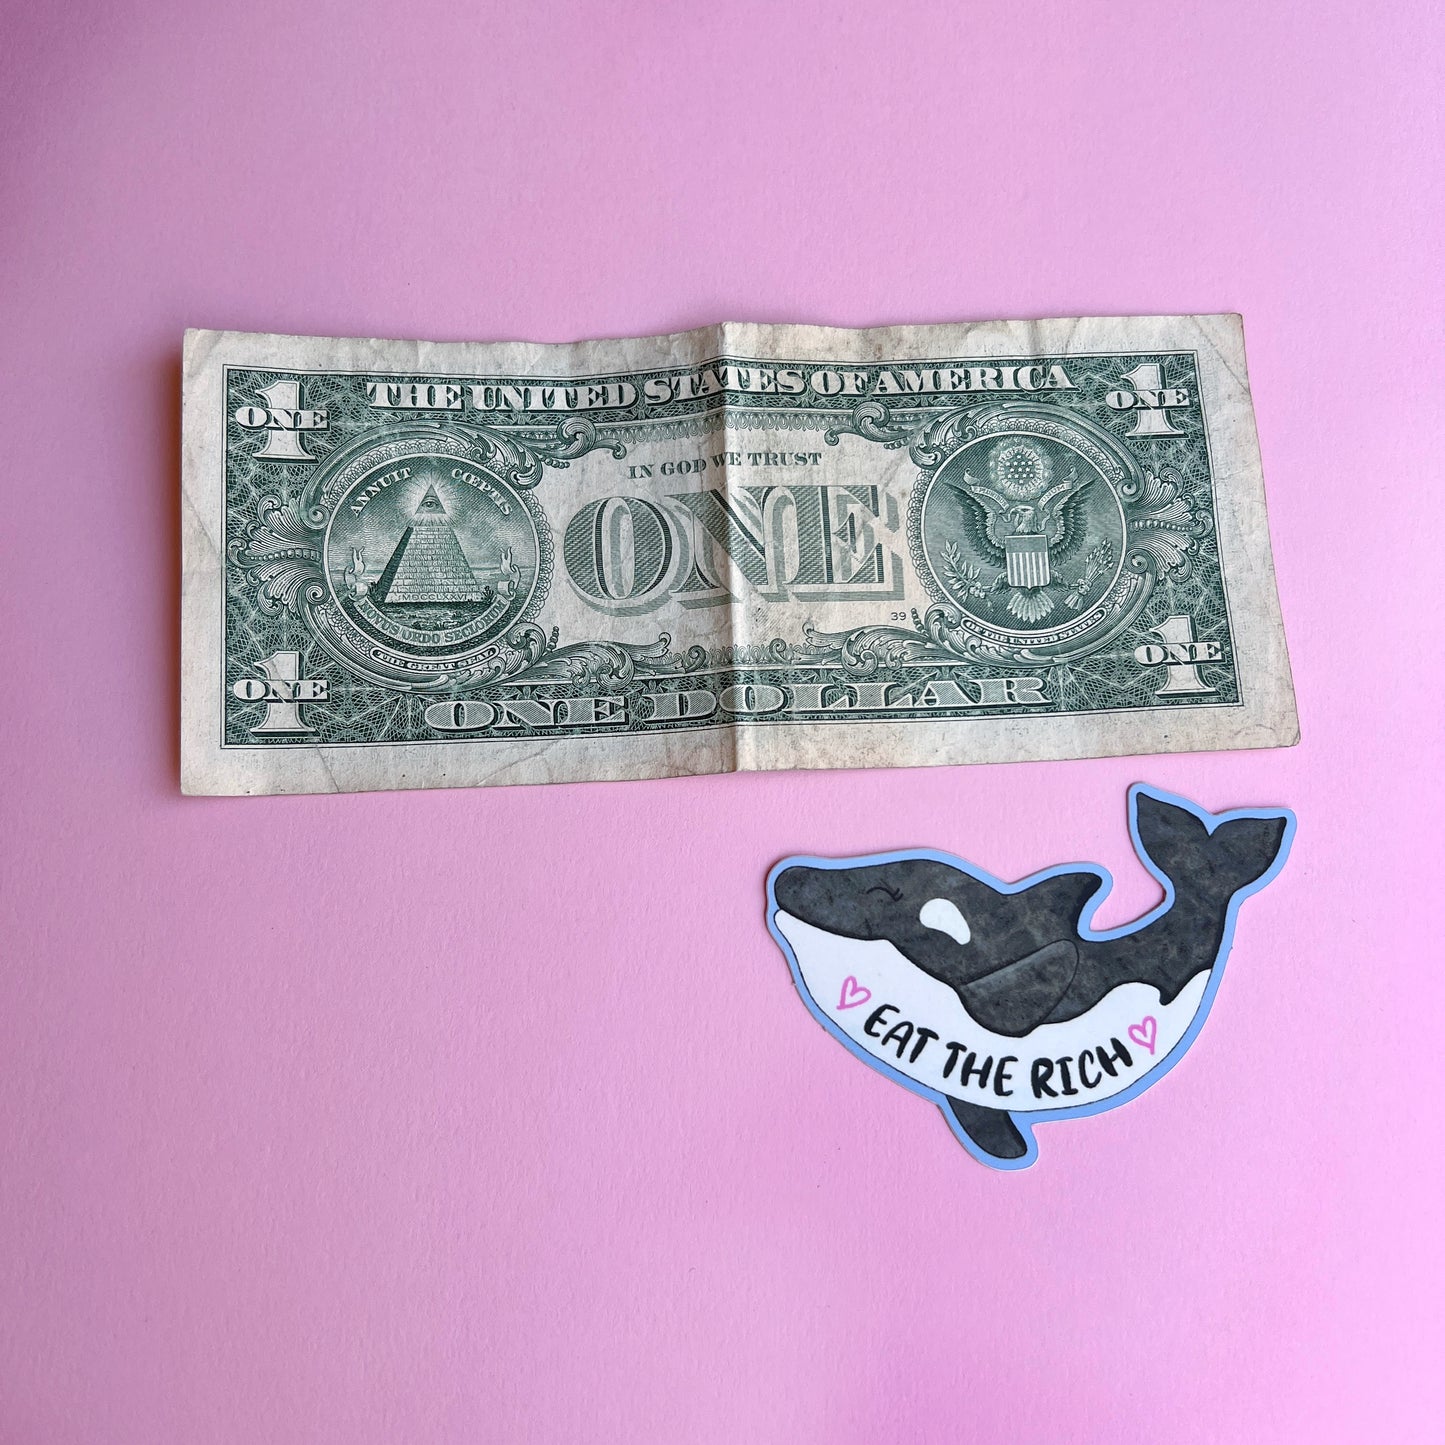 Smaller Gladis the orca "eat the rich" sticker